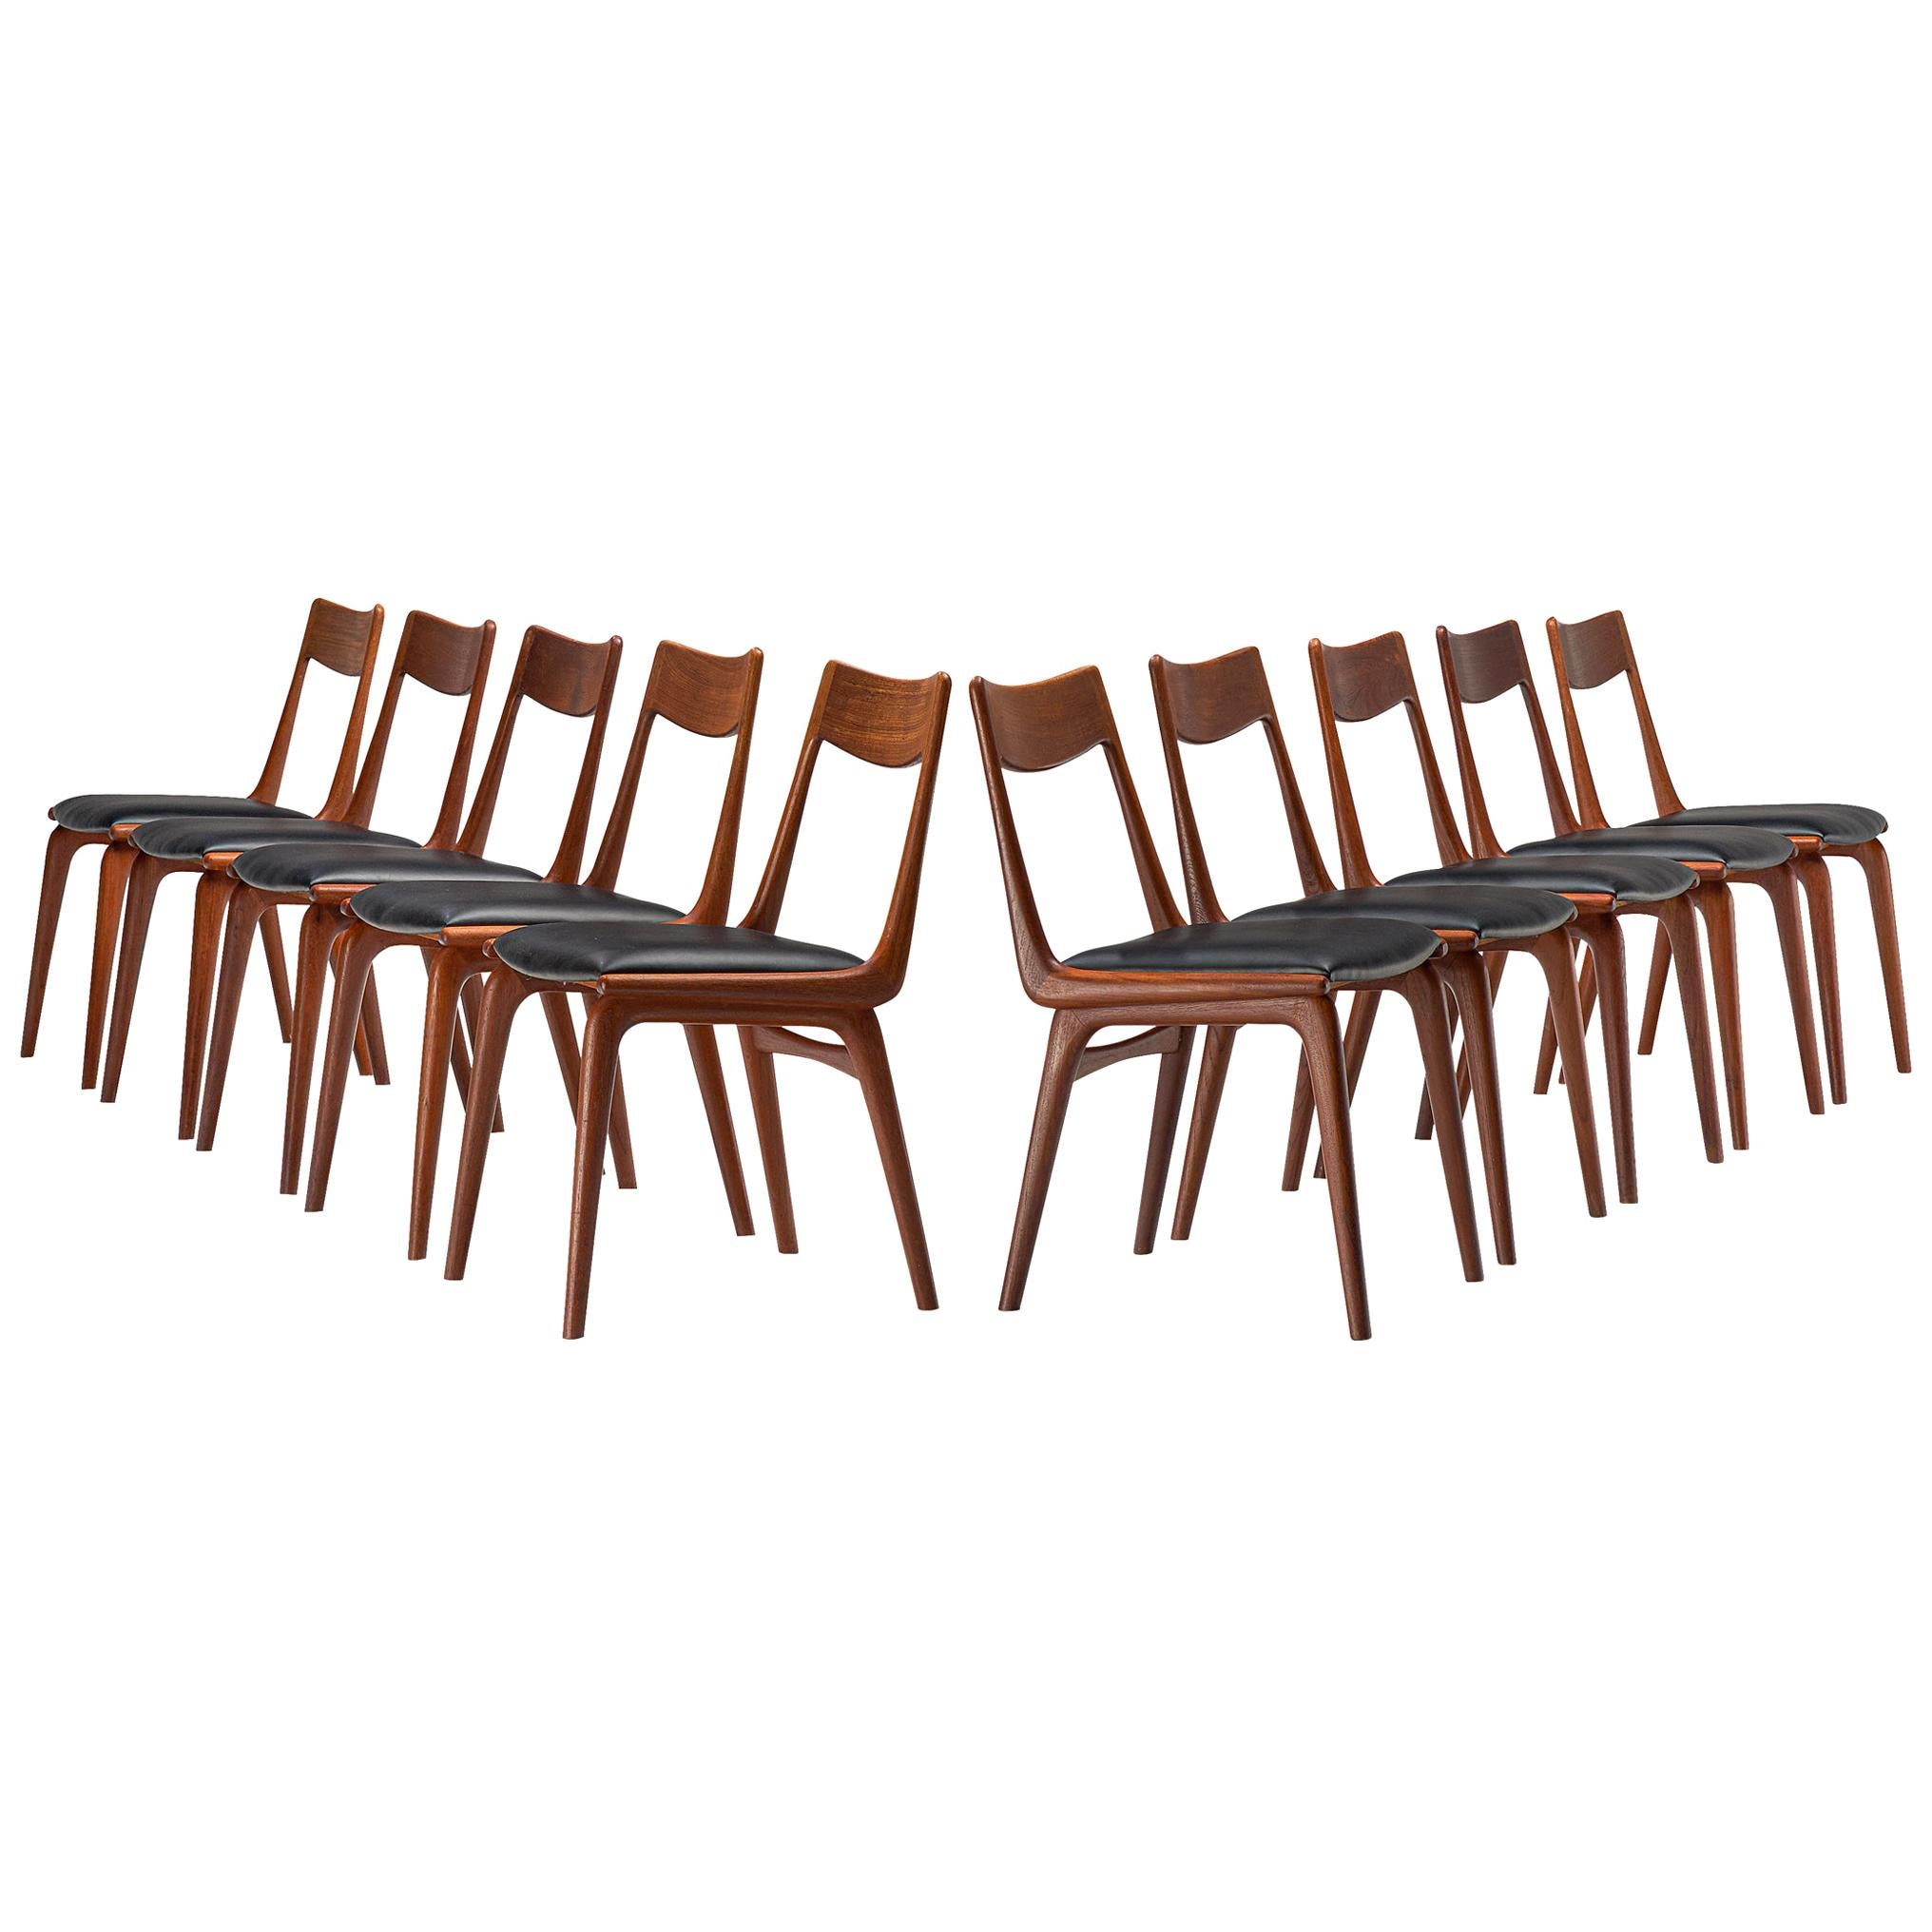 Large Set of Ten 'Boomerang' Chairs in Teak by Alfred Christensen